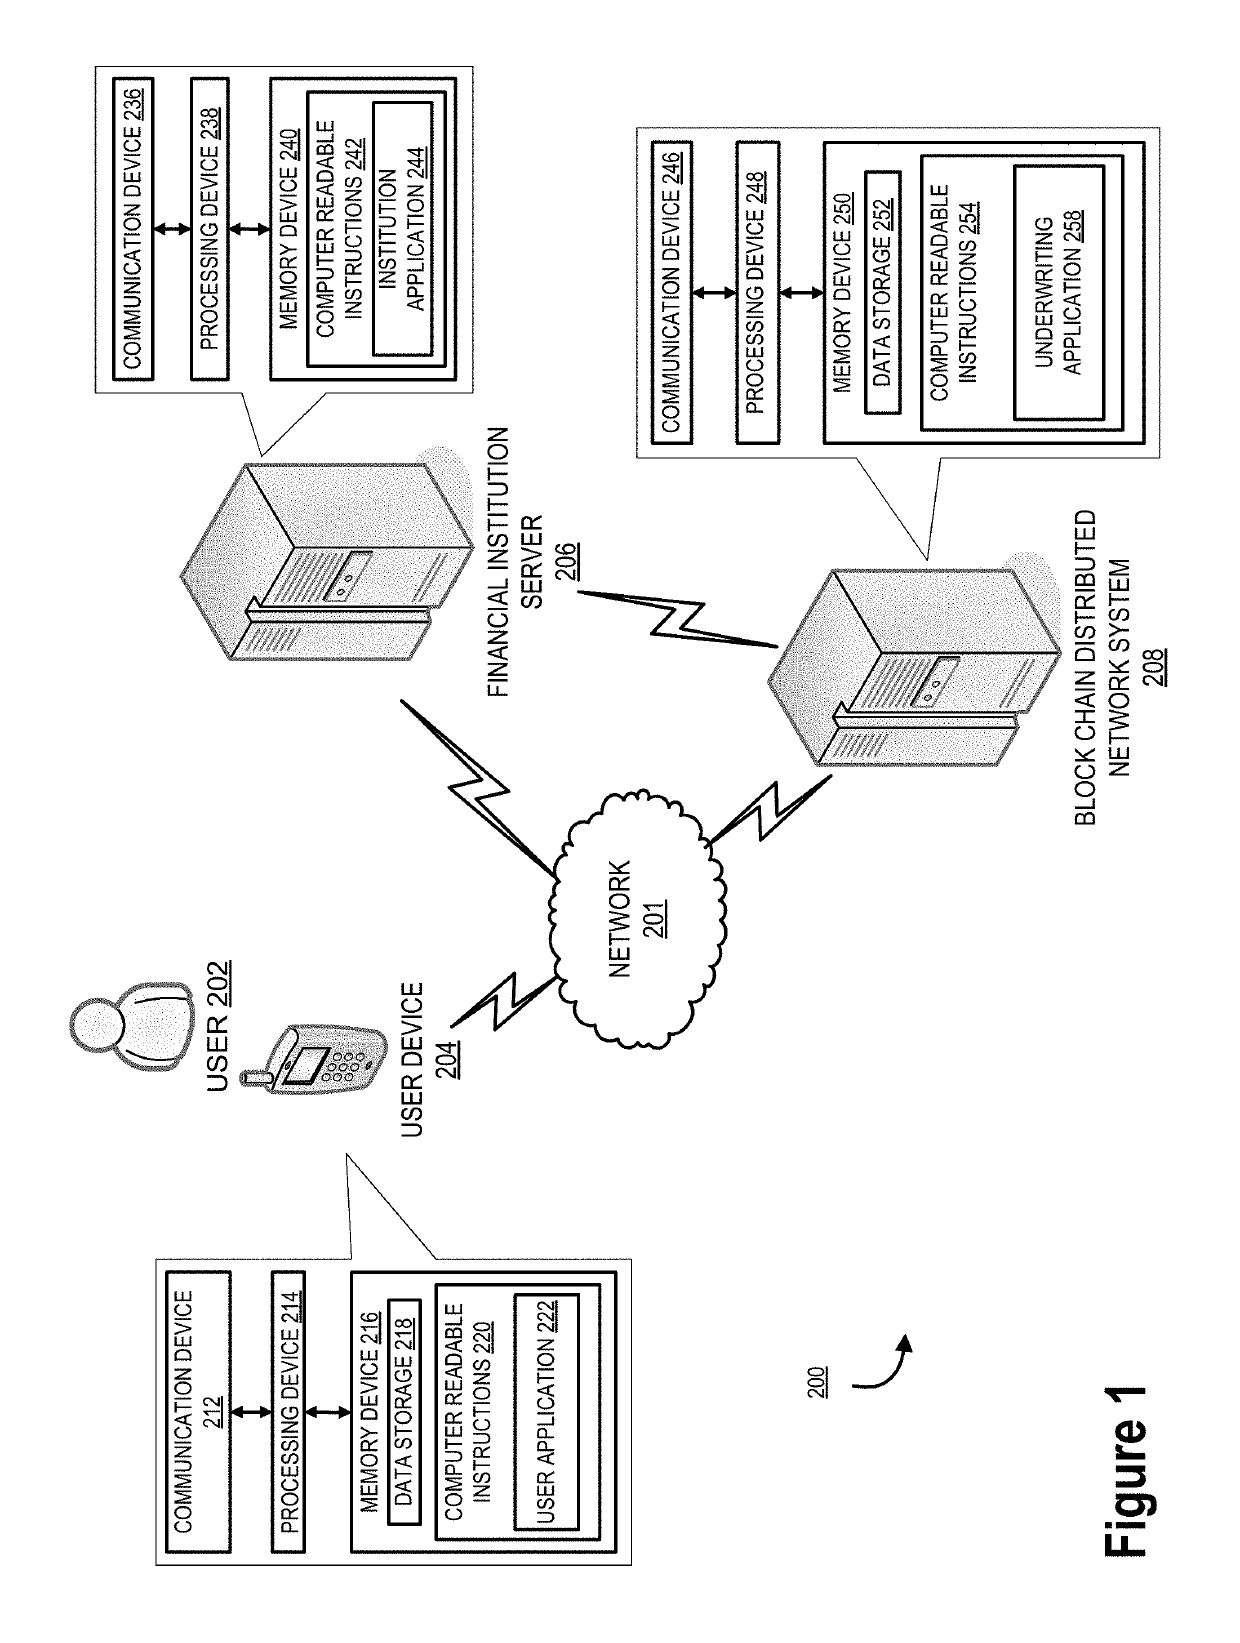 System for external validation of private-to-public transition protocols